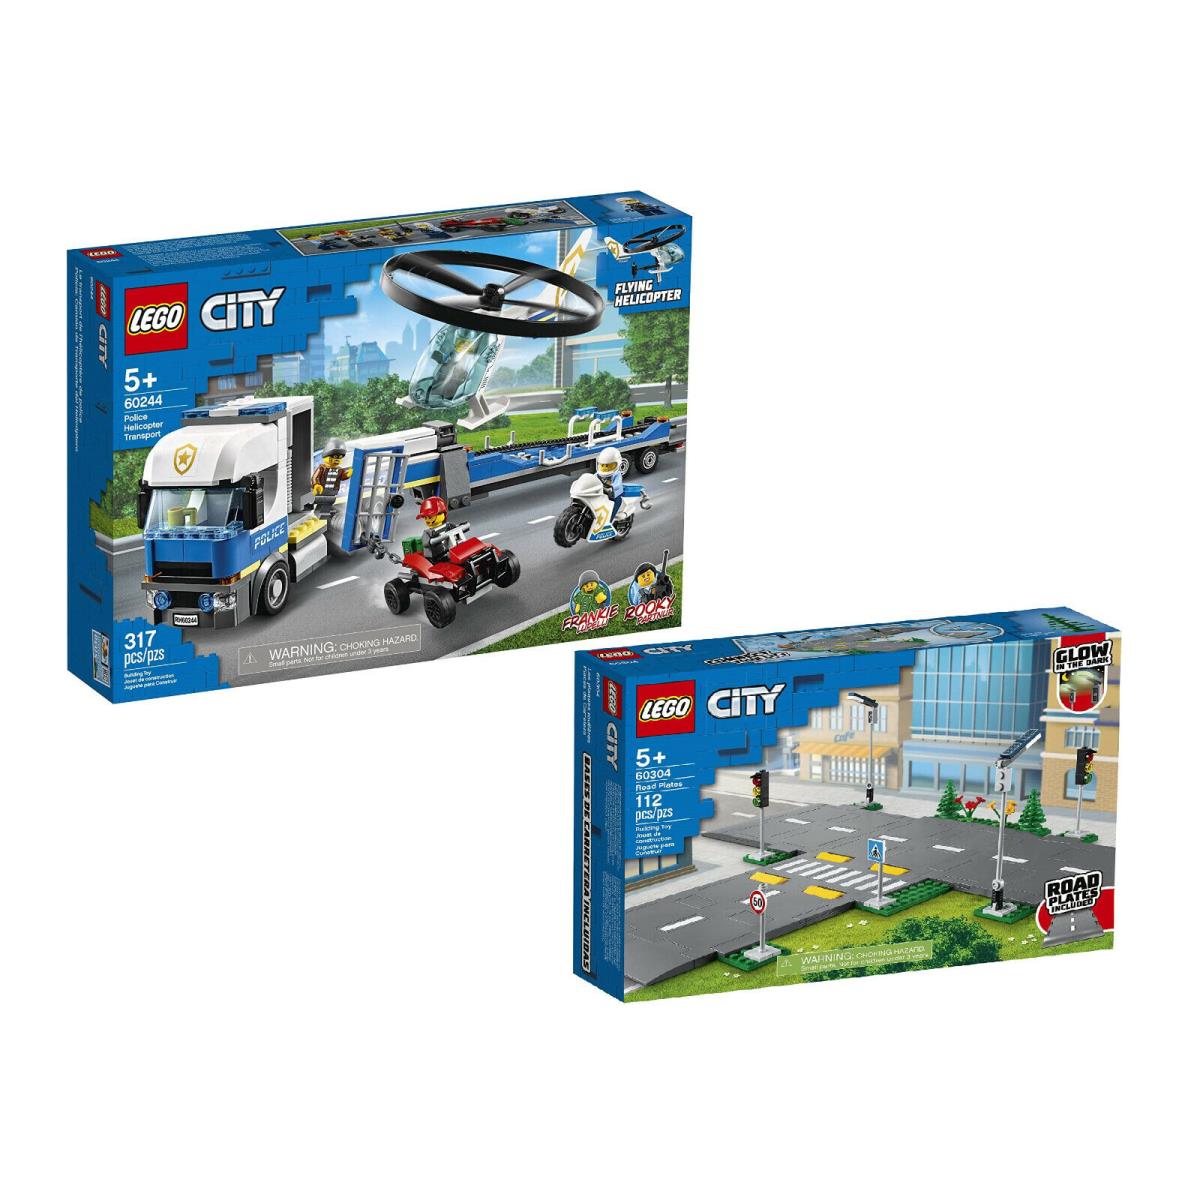 Lego City Building Sets 60244 60304 Police Helicopter Chase with Road Plates